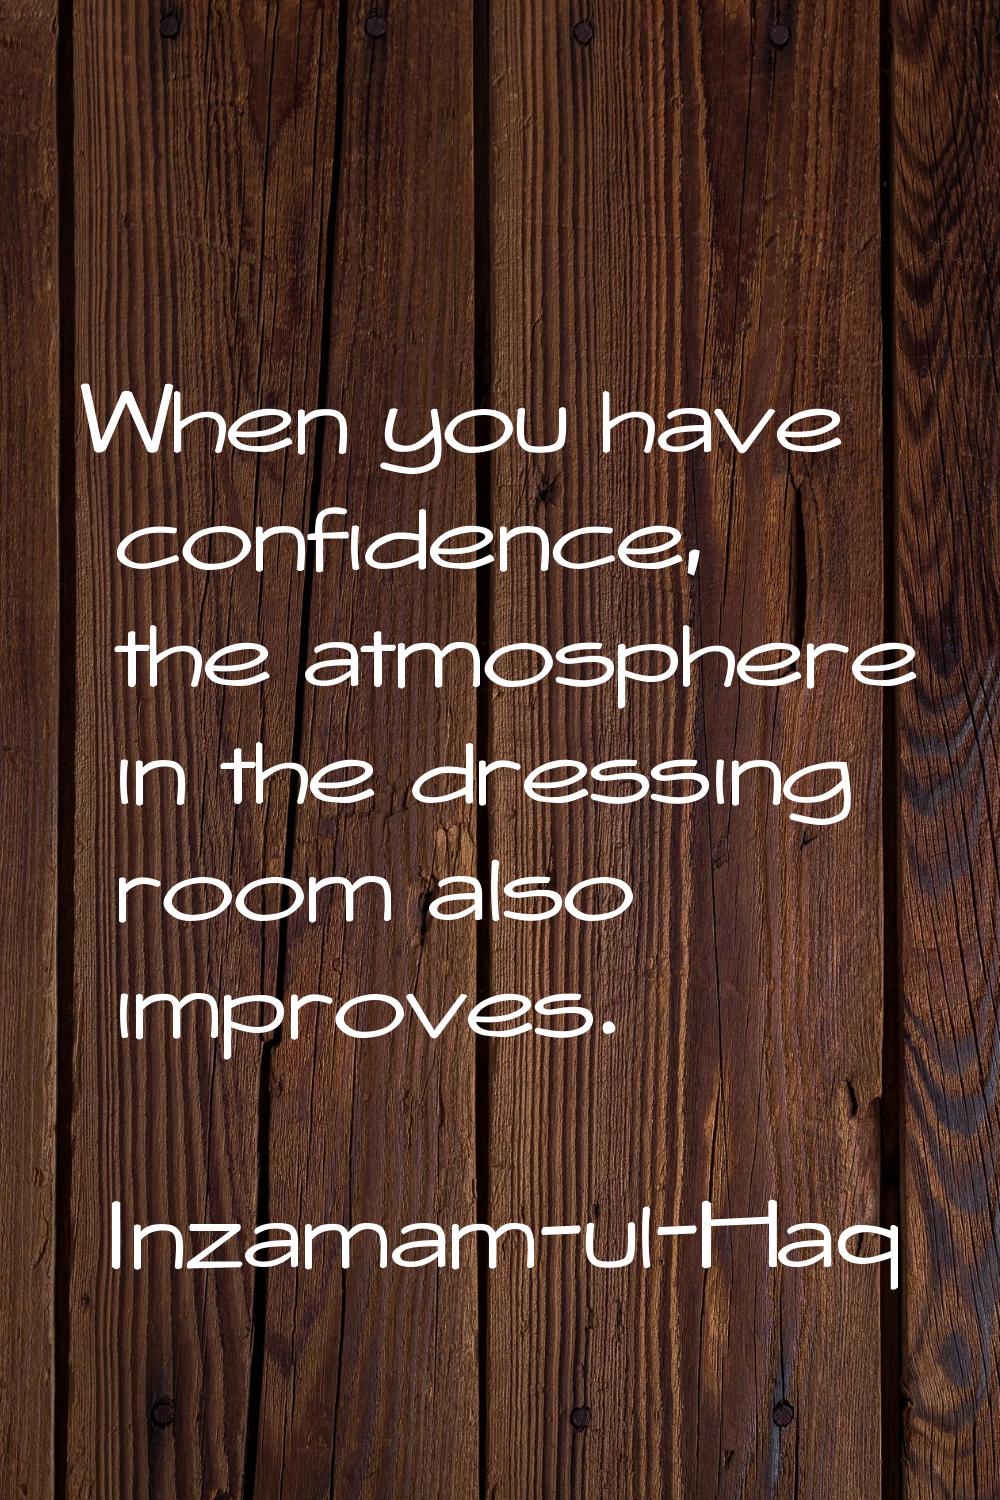 When you have confidence, the atmosphere in the dressing room also improves.